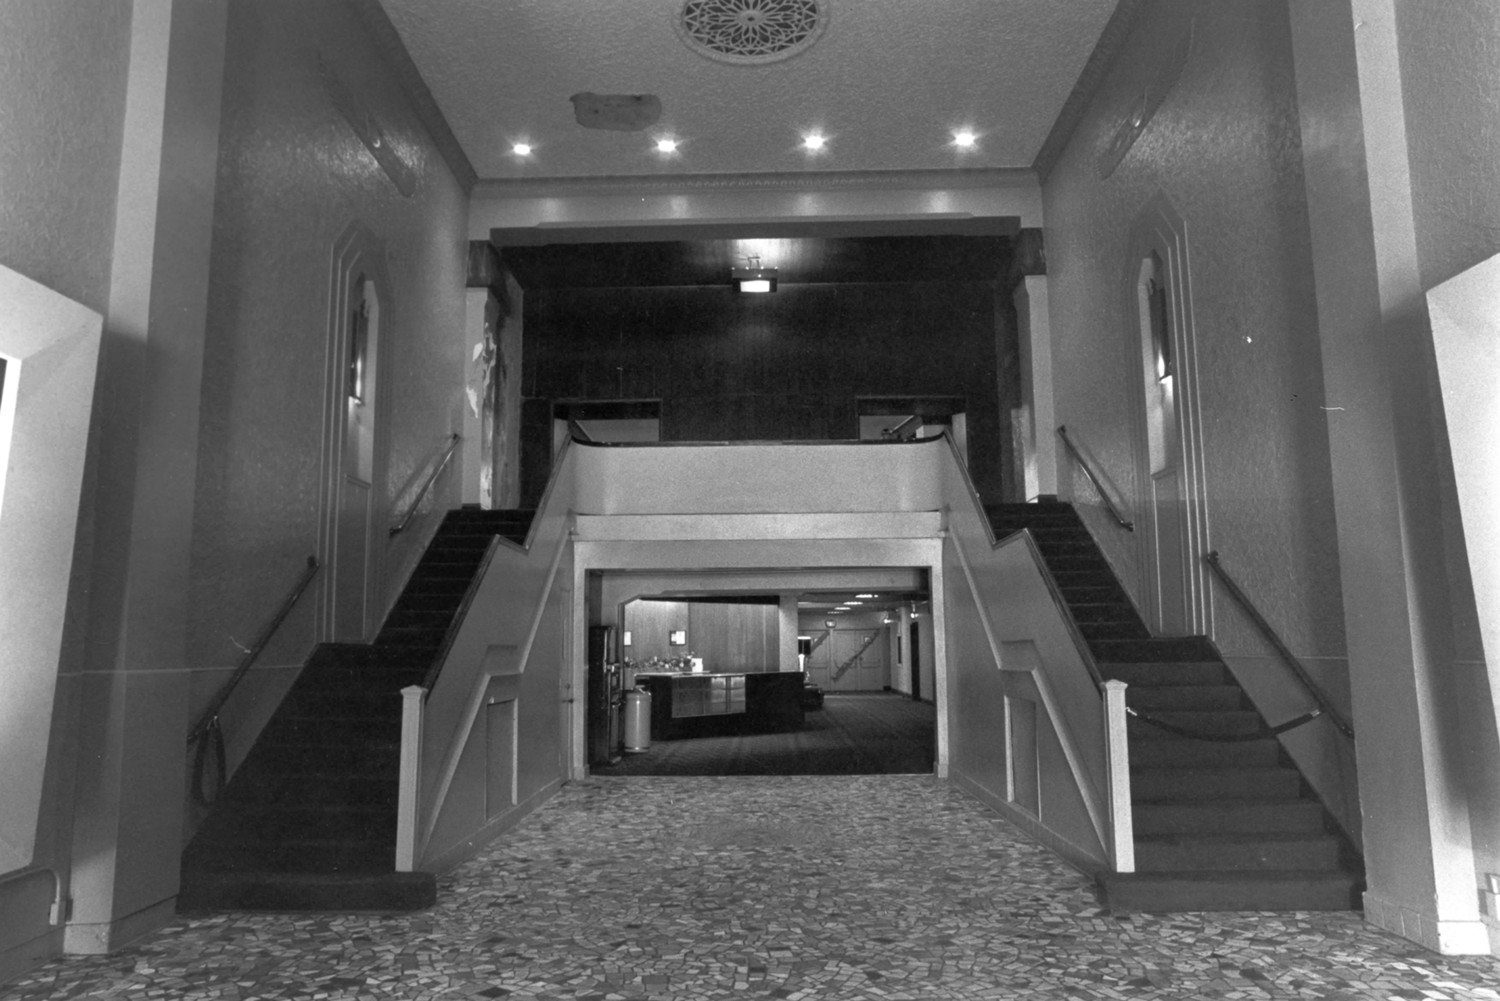 Egyptian Theatre, DeKalb Illinois Main lobby with pilaster capitals, cornice, falcon wings obscured by paint (1978)